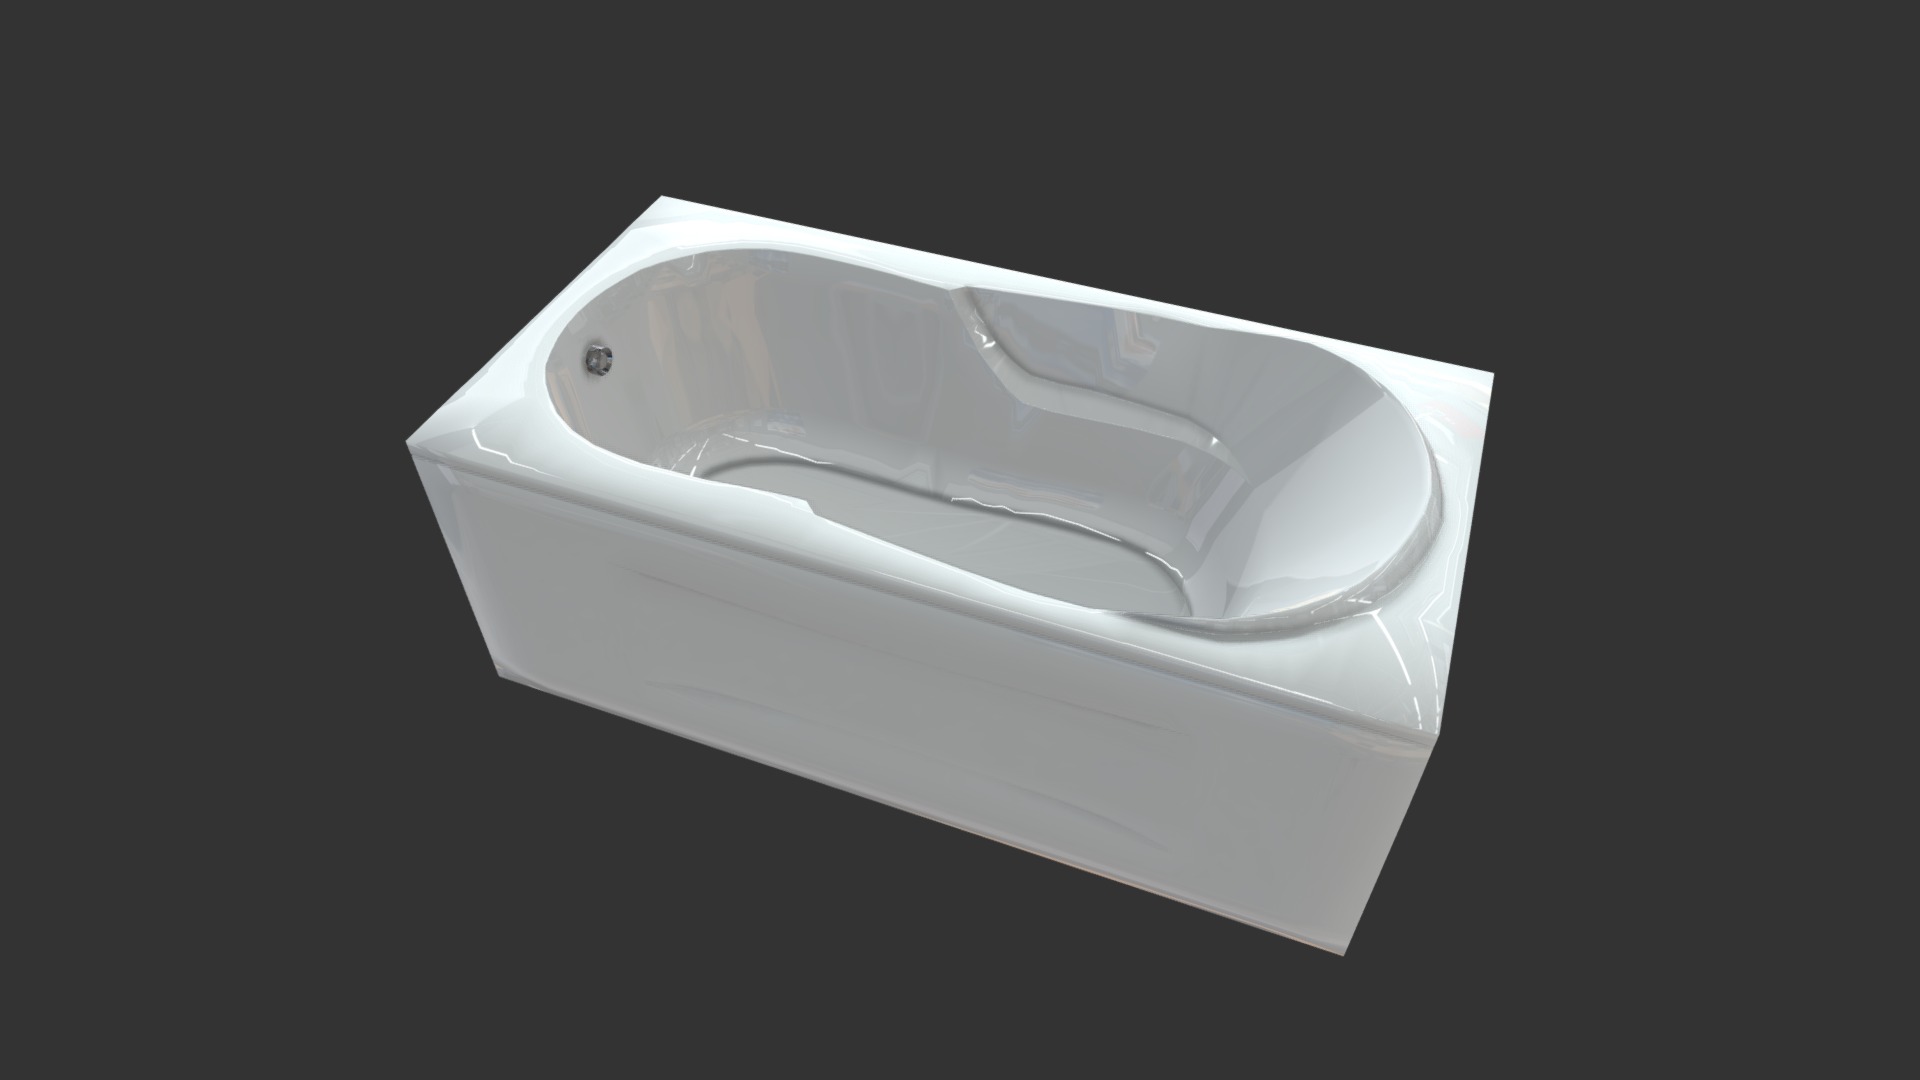 3D model TTR-2B - This is a 3D model of the TTR-2B. The 3D model is about a white rectangular object.